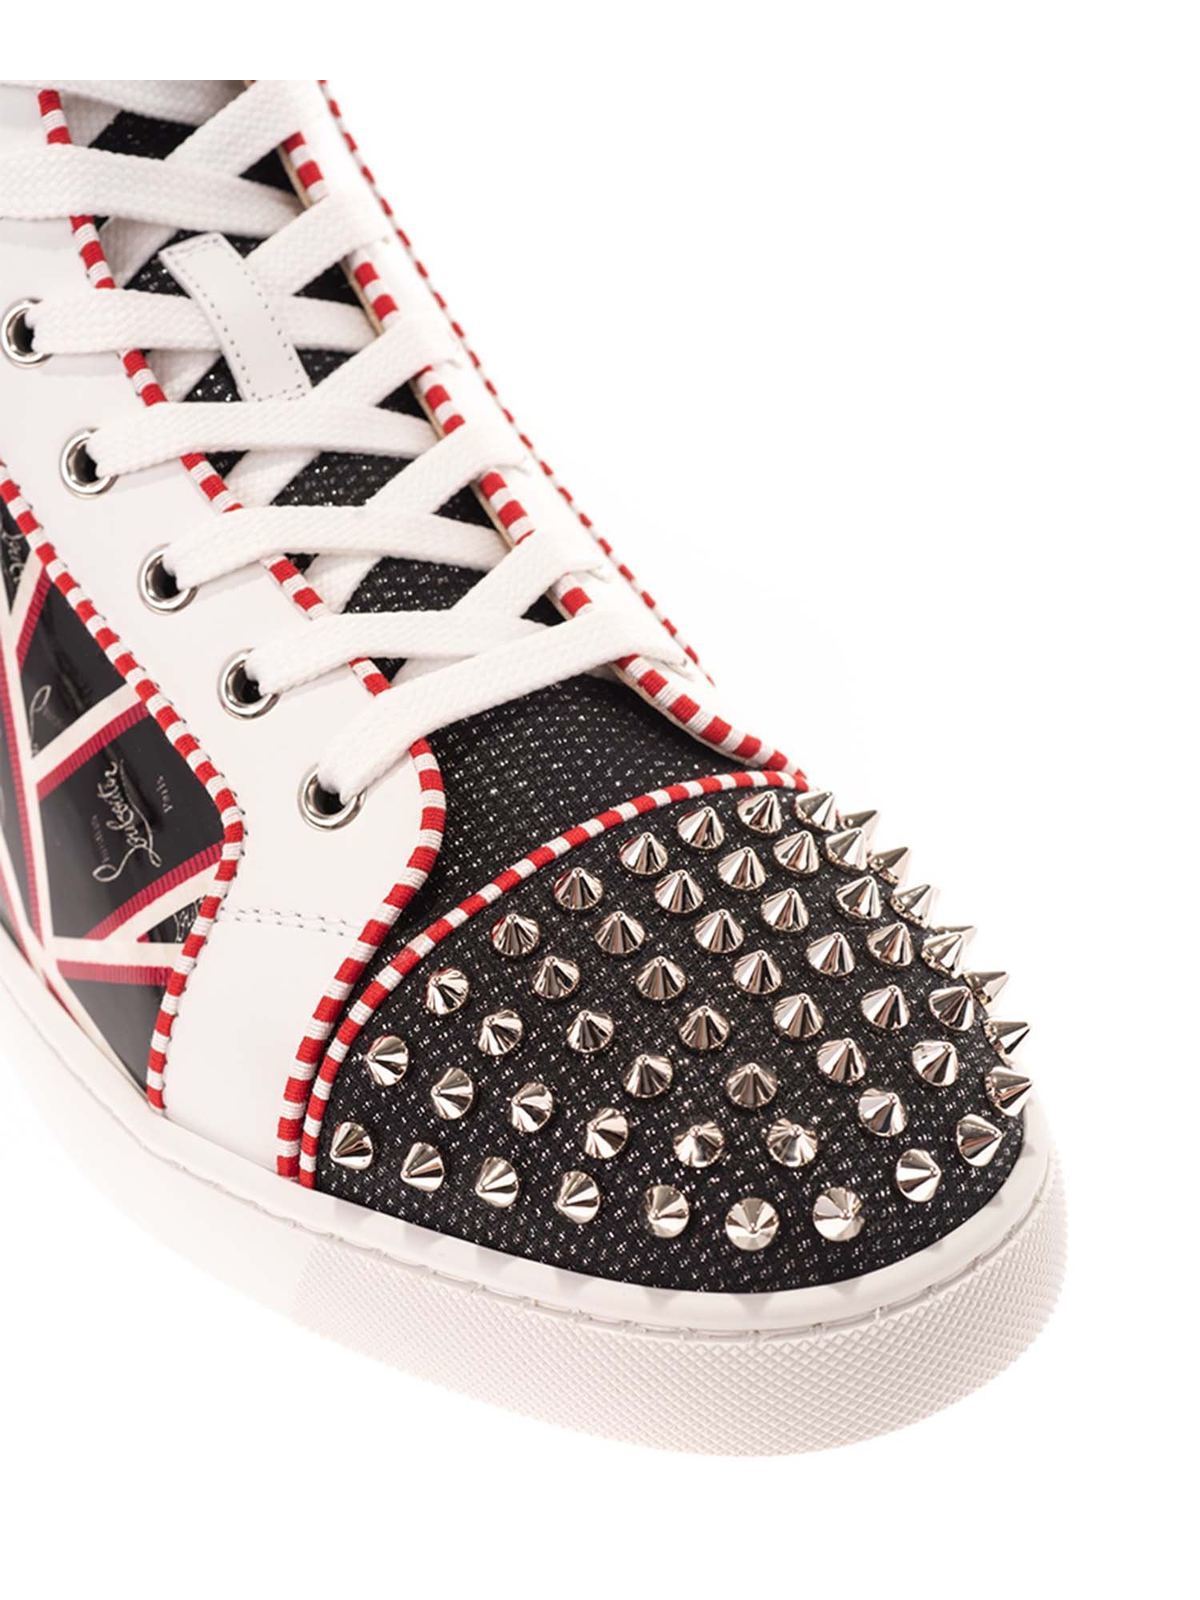 Christian Louboutin Louis Orlato Spikes Black Red Leather Sneakers